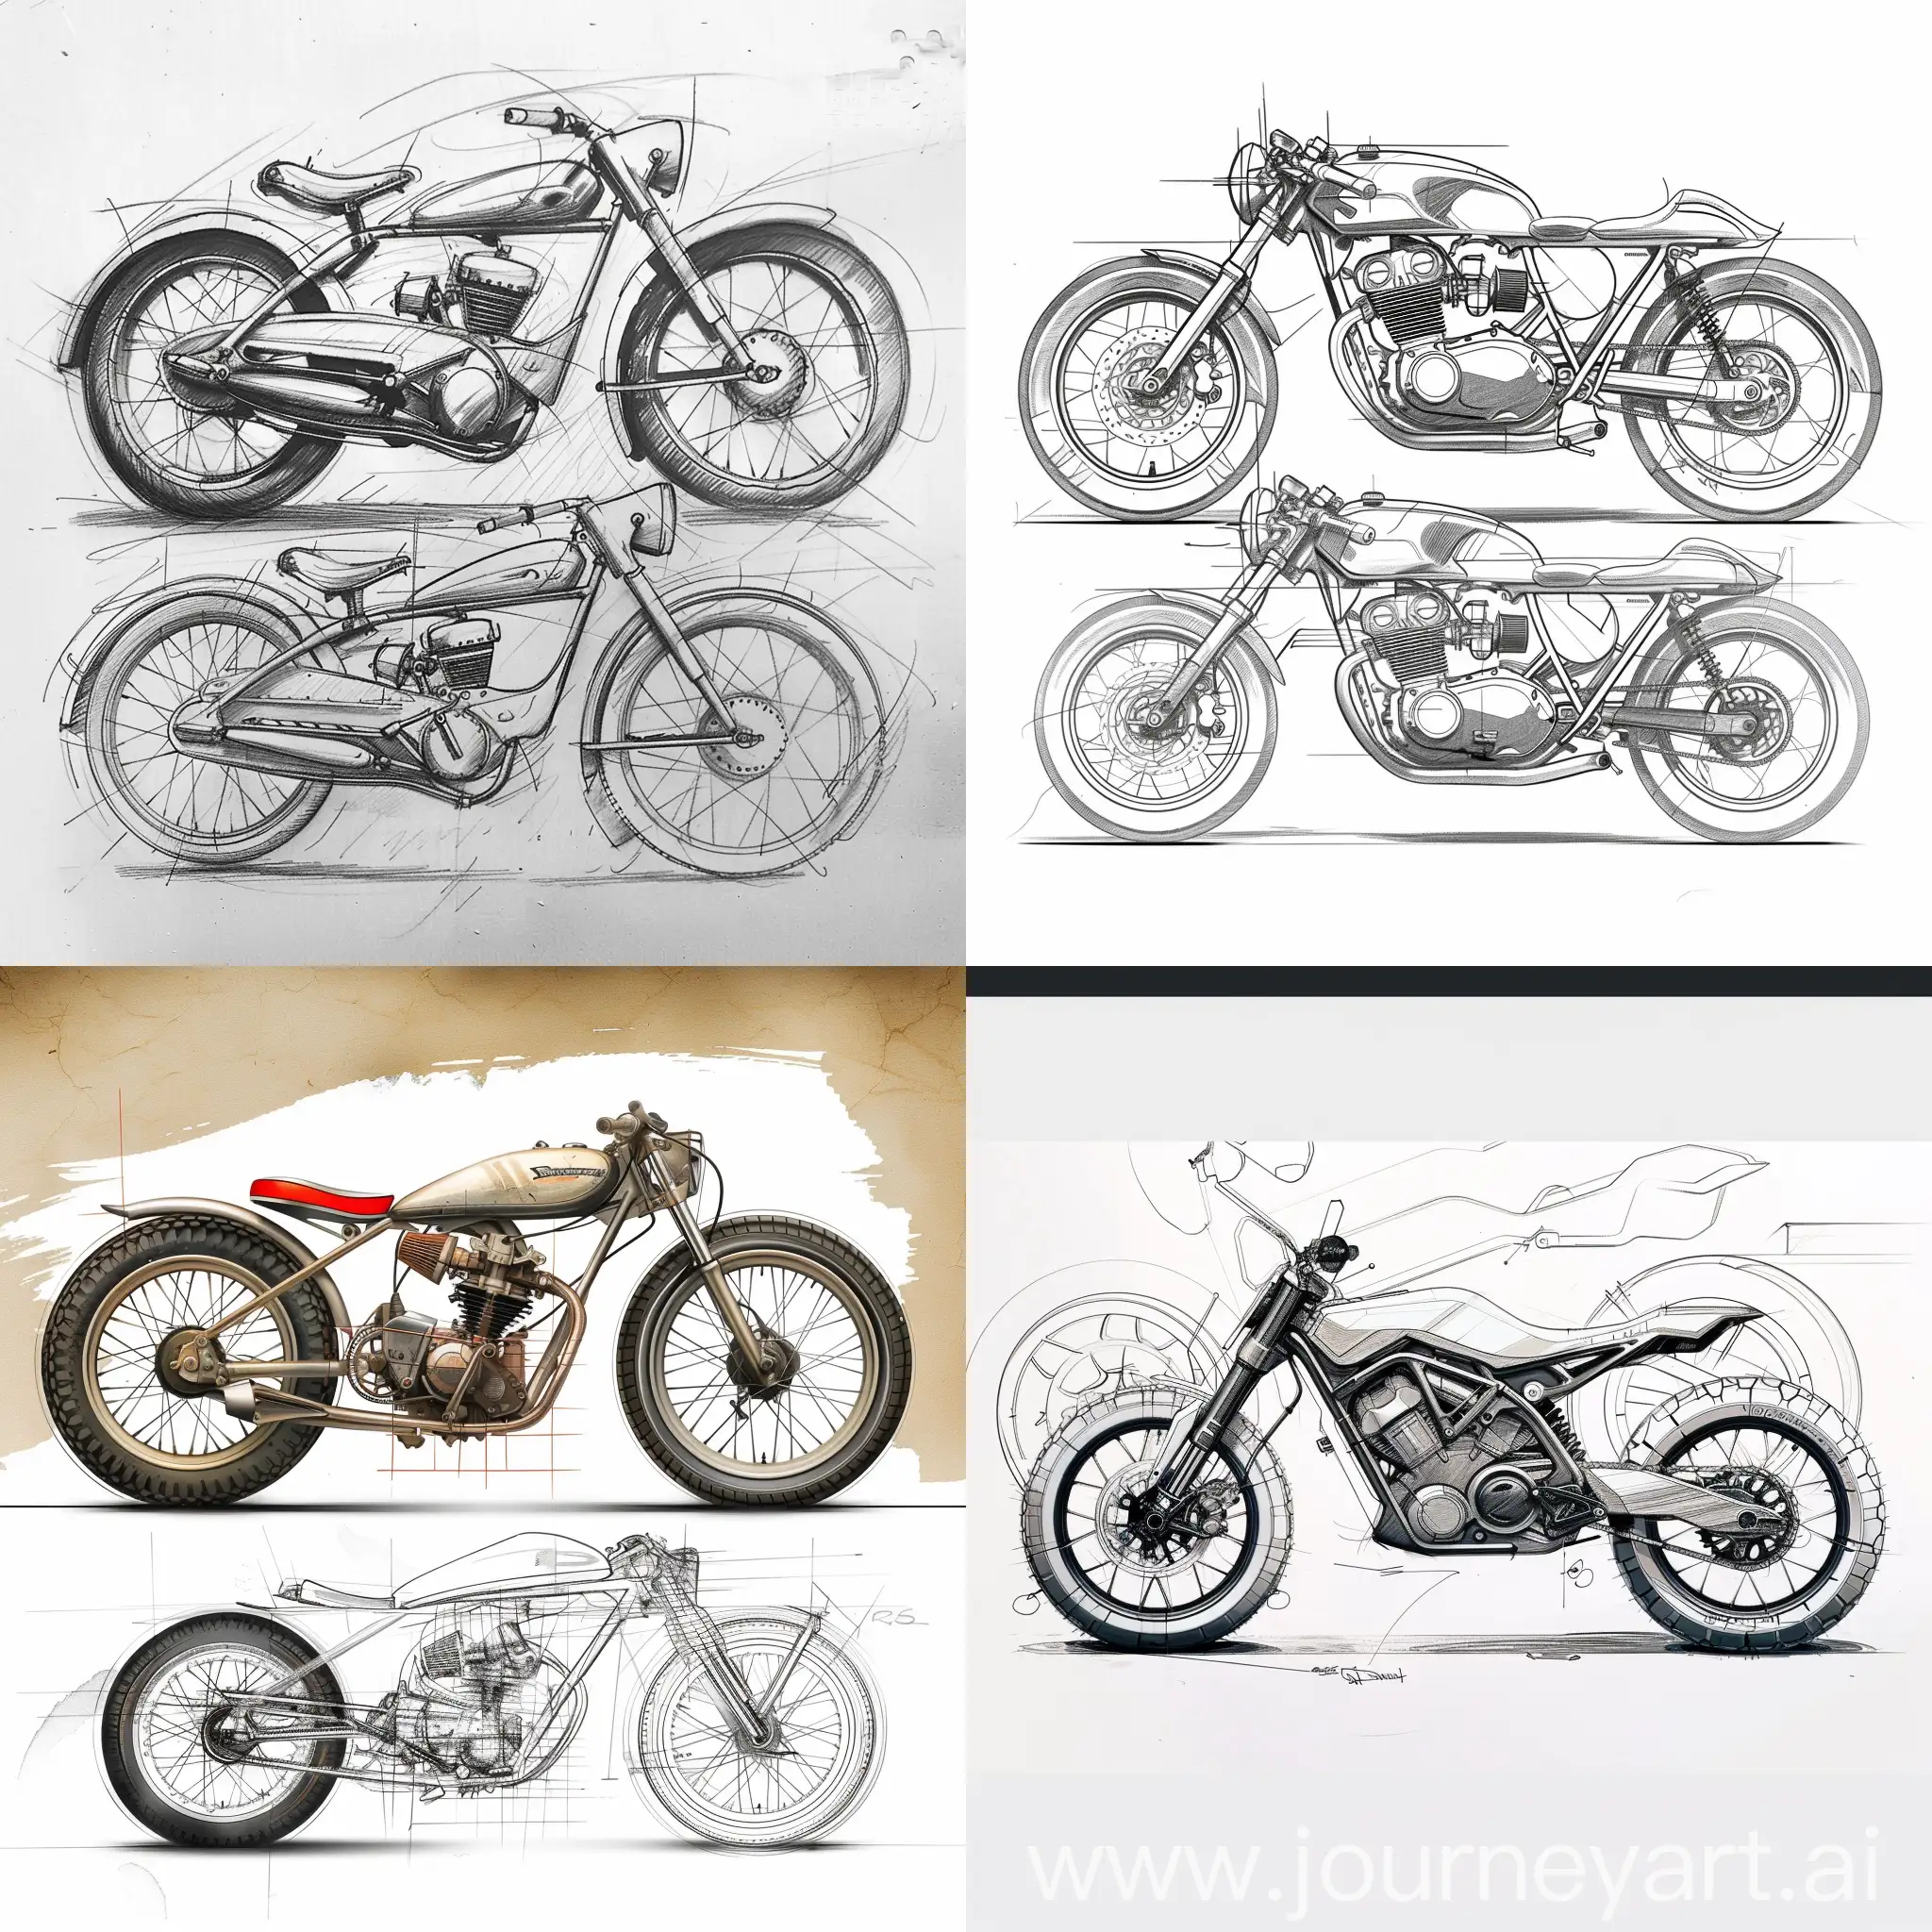 Motorcycle-Sketches-Viewed-from-Multiple-Angles